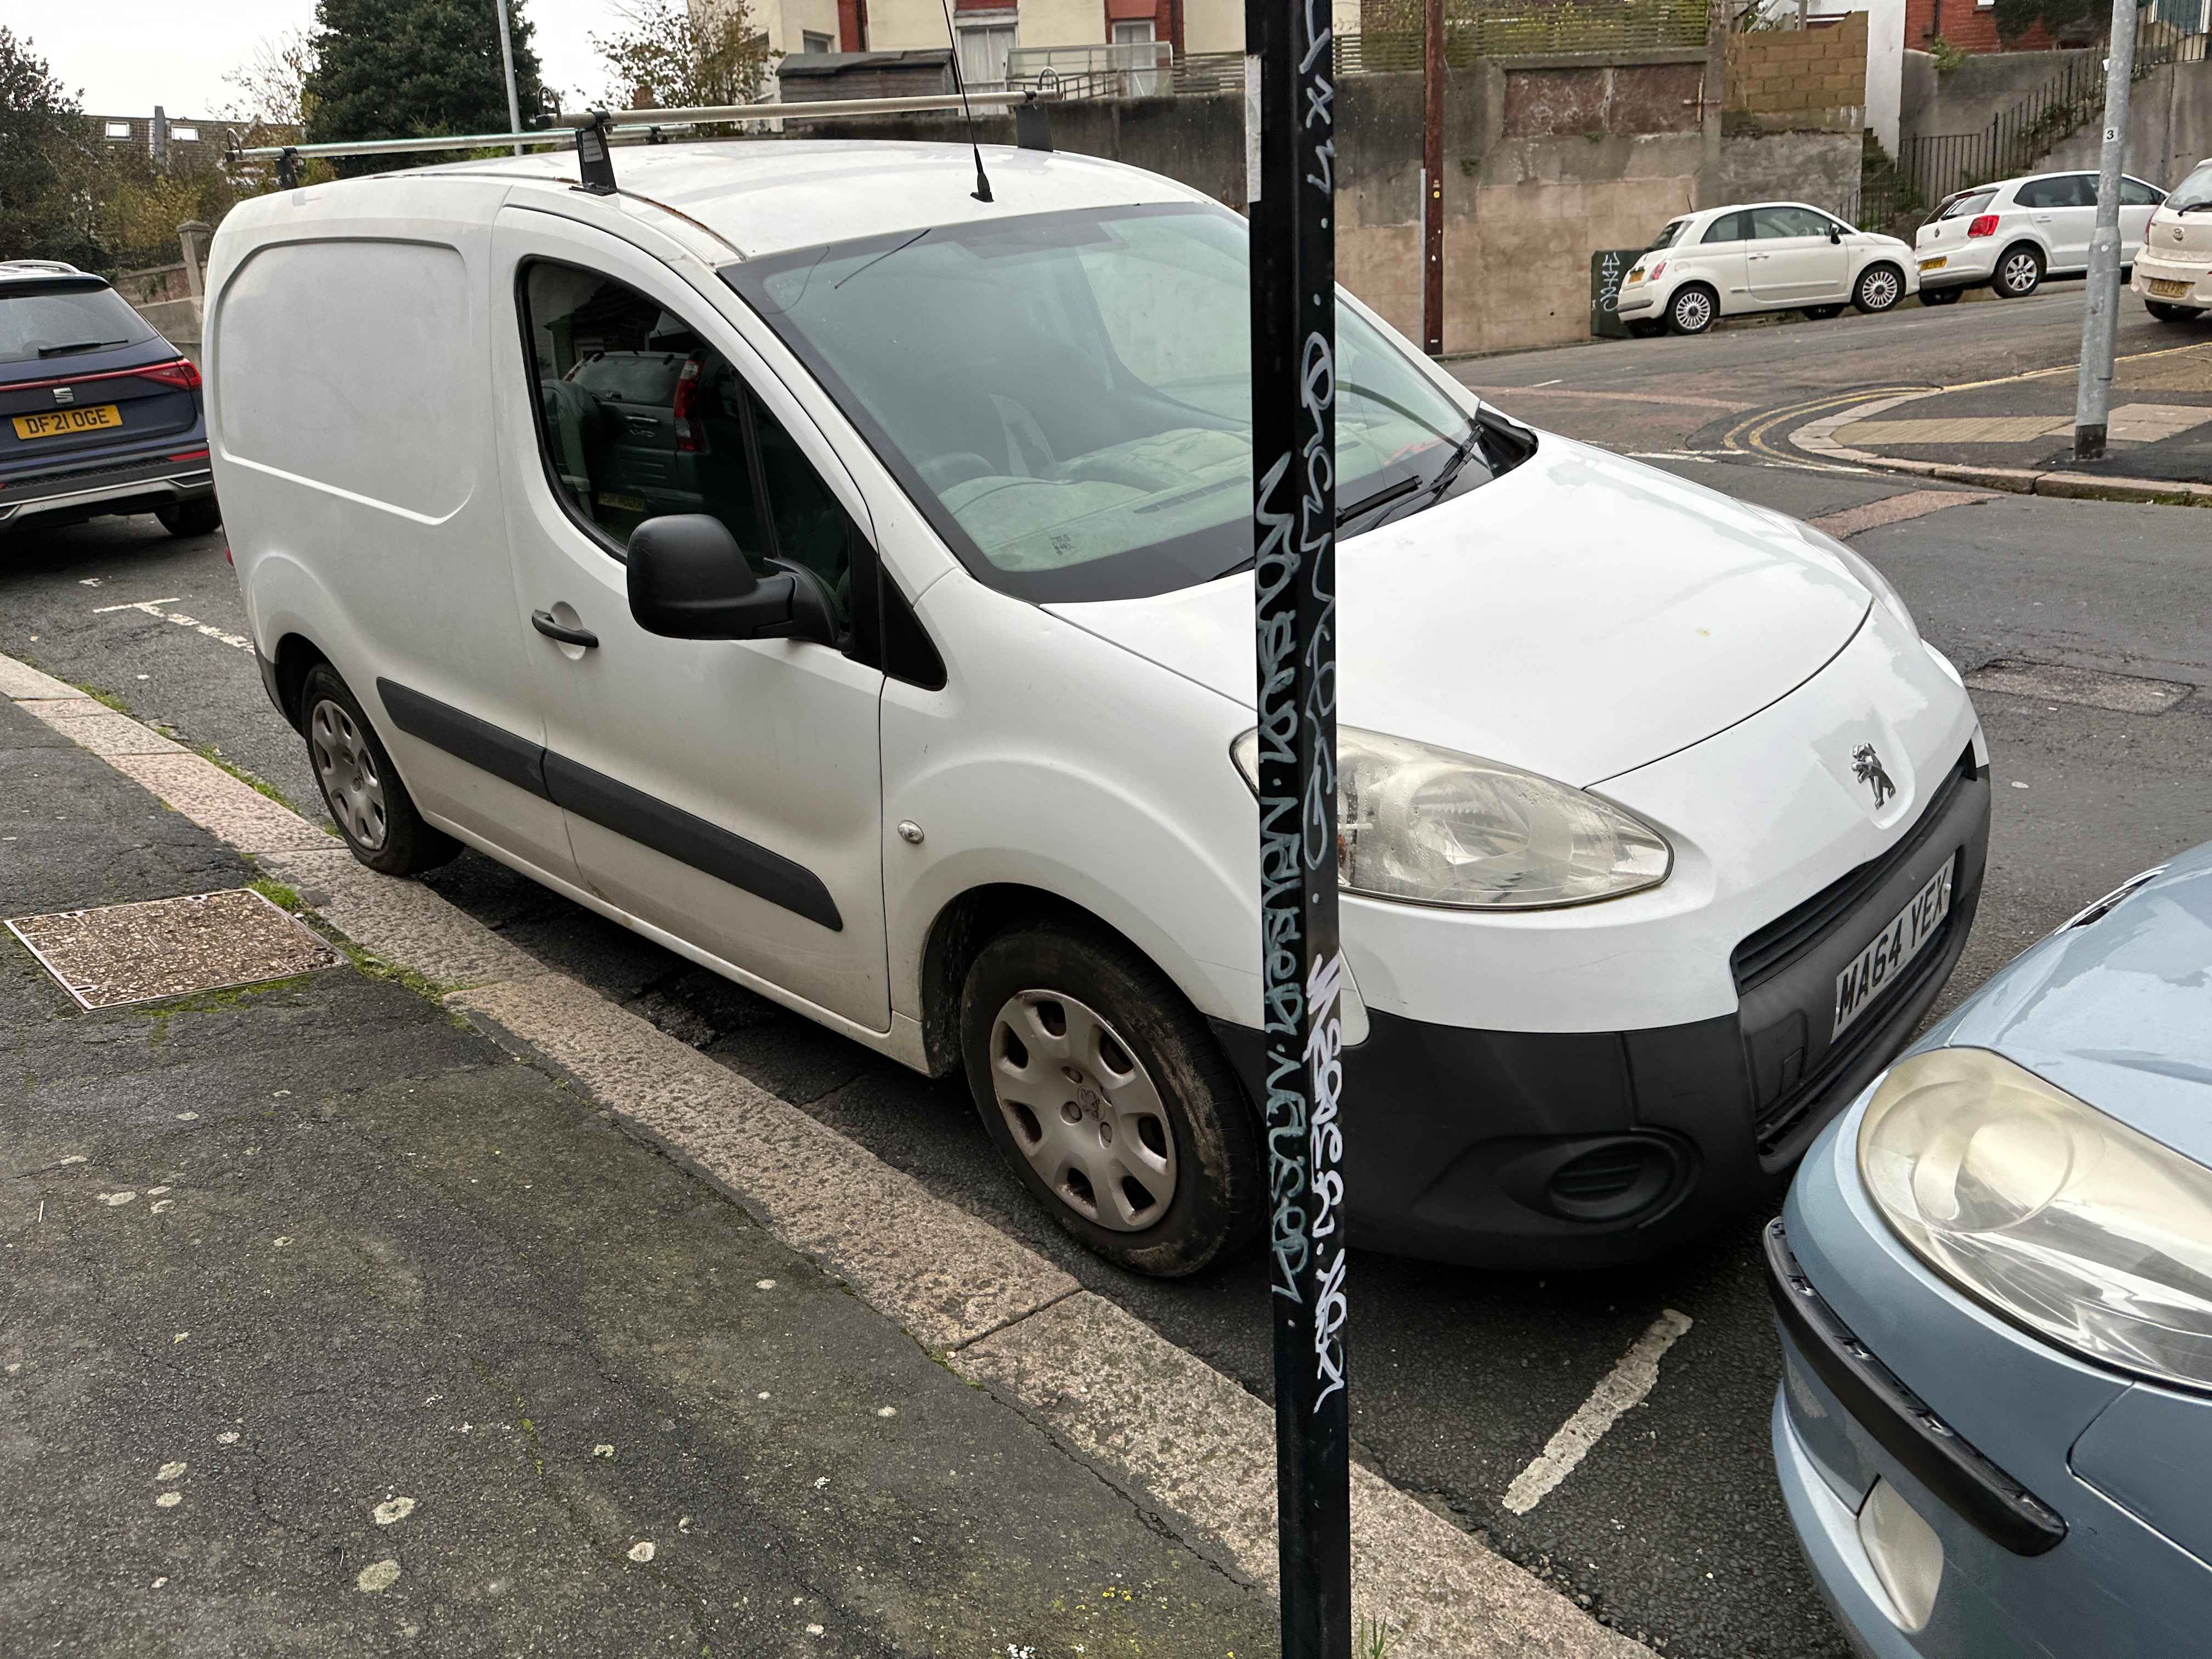 Photograph of MA64 YEX - a White Peugeot Partner parked in Hollingdean by a non-resident. The third of six photographs supplied by the residents of Hollingdean.